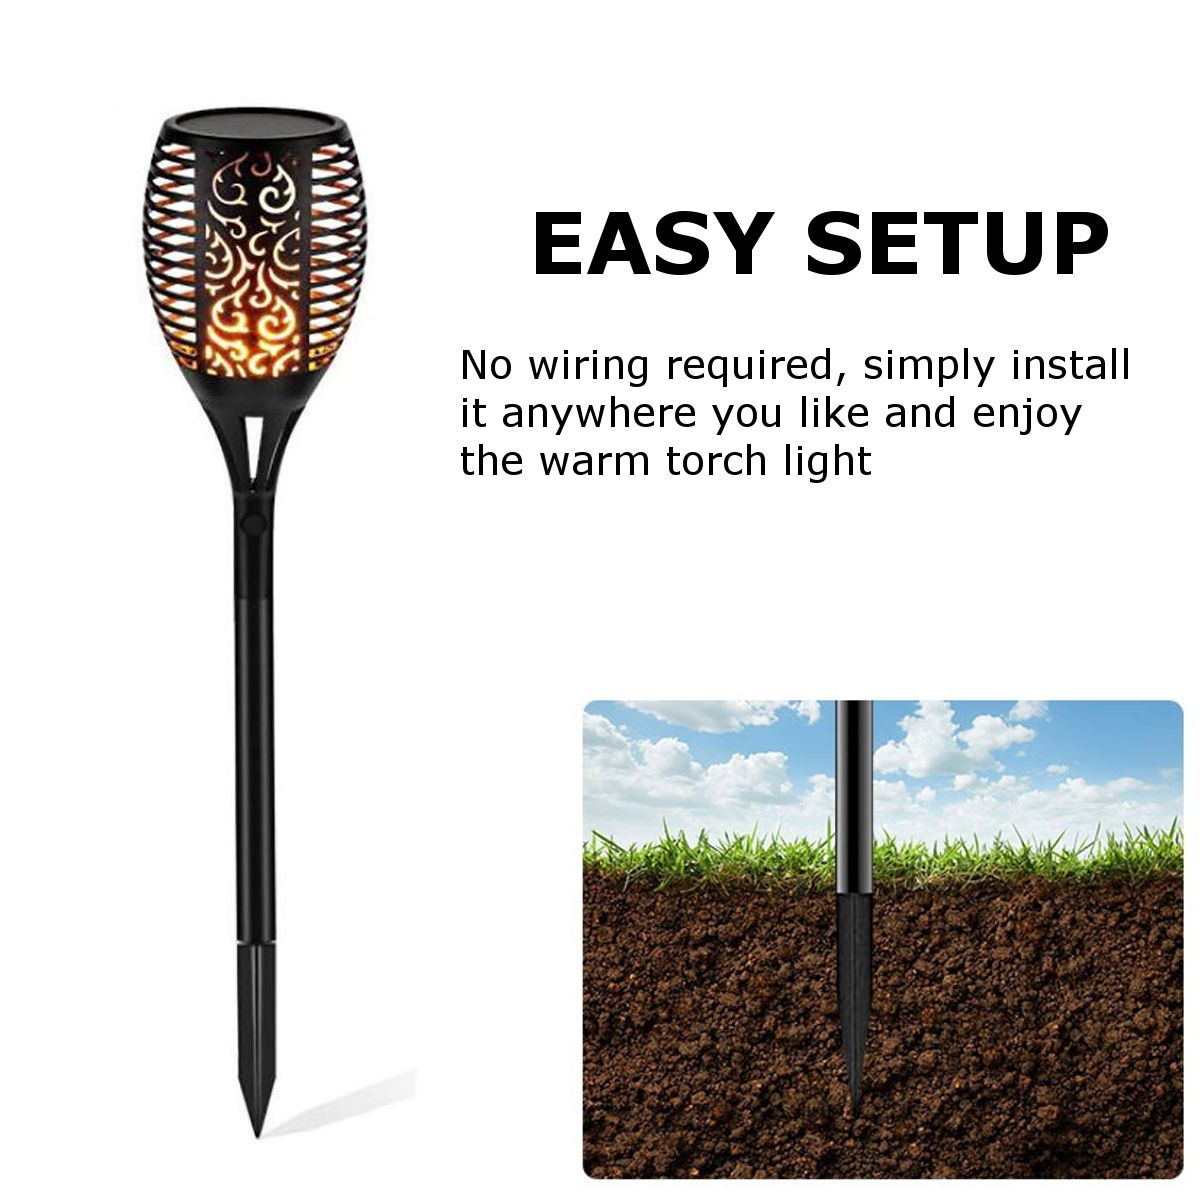 12335196LED-Solar-Light-Outdoor-Waterproof-Flashing-Flame-Lawn-Lamp-for-Garden-Camping-1698445